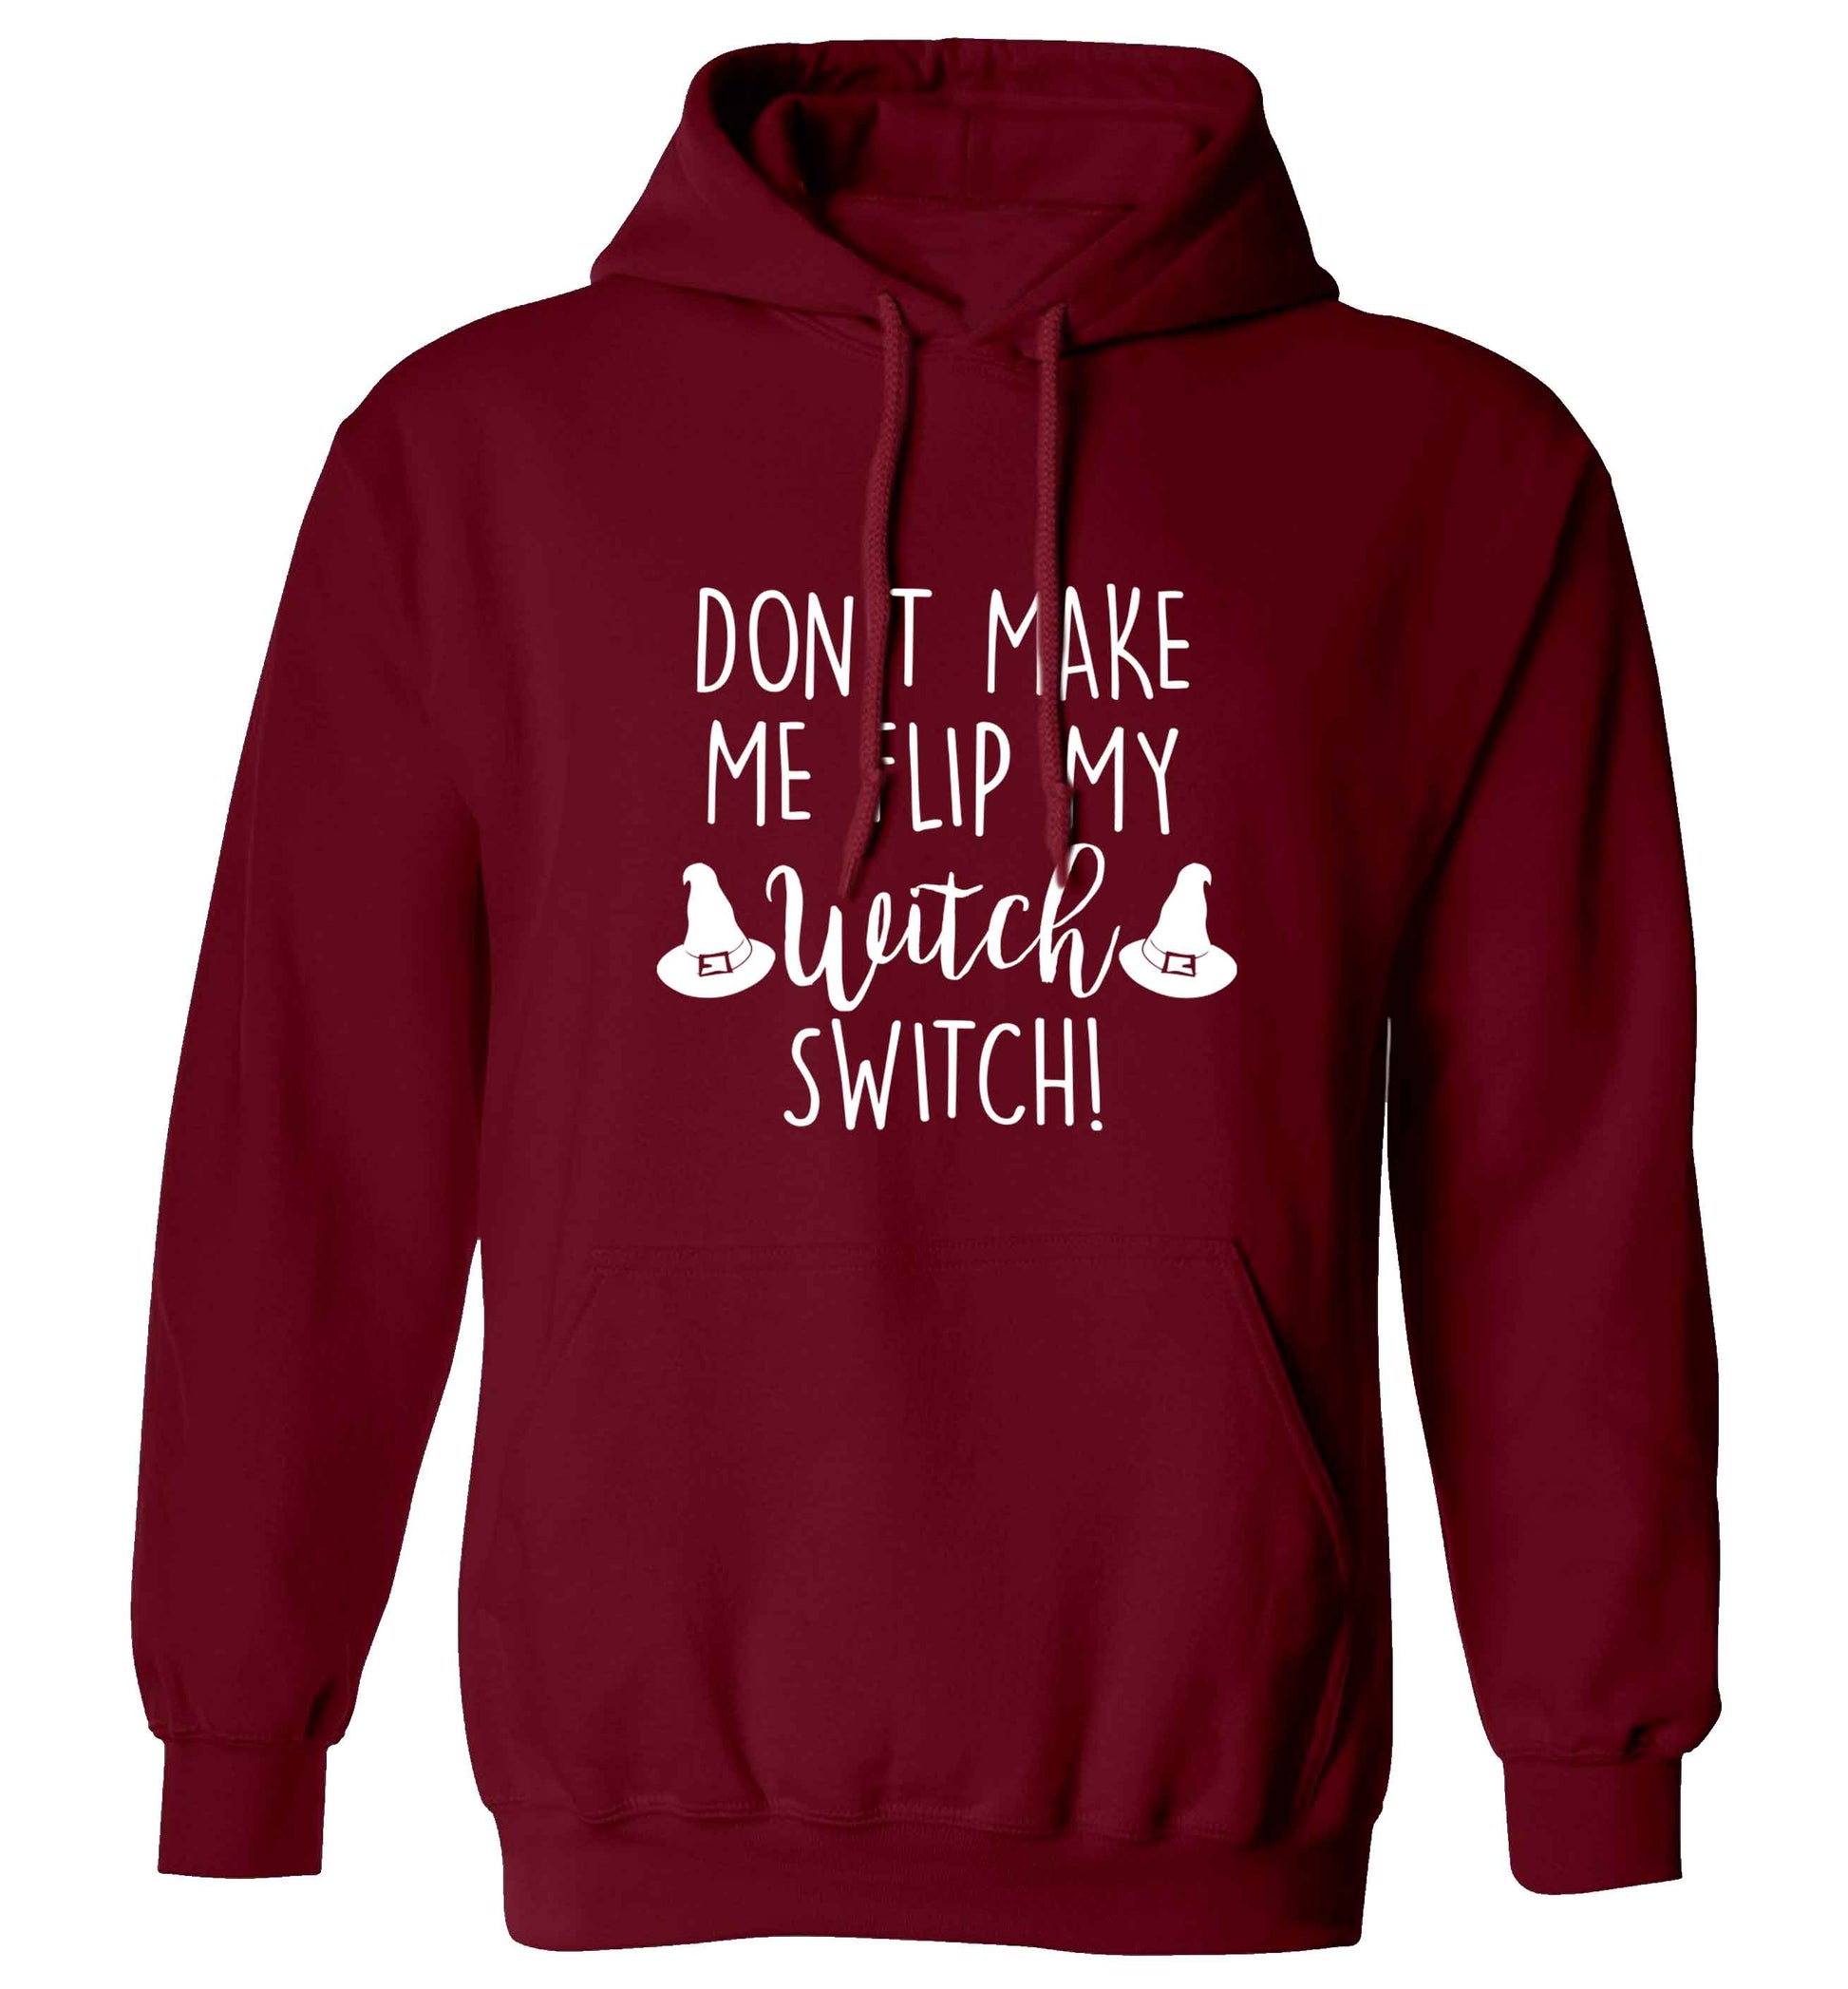 Don't make me flip my witch switch adults unisex maroon hoodie 2XL